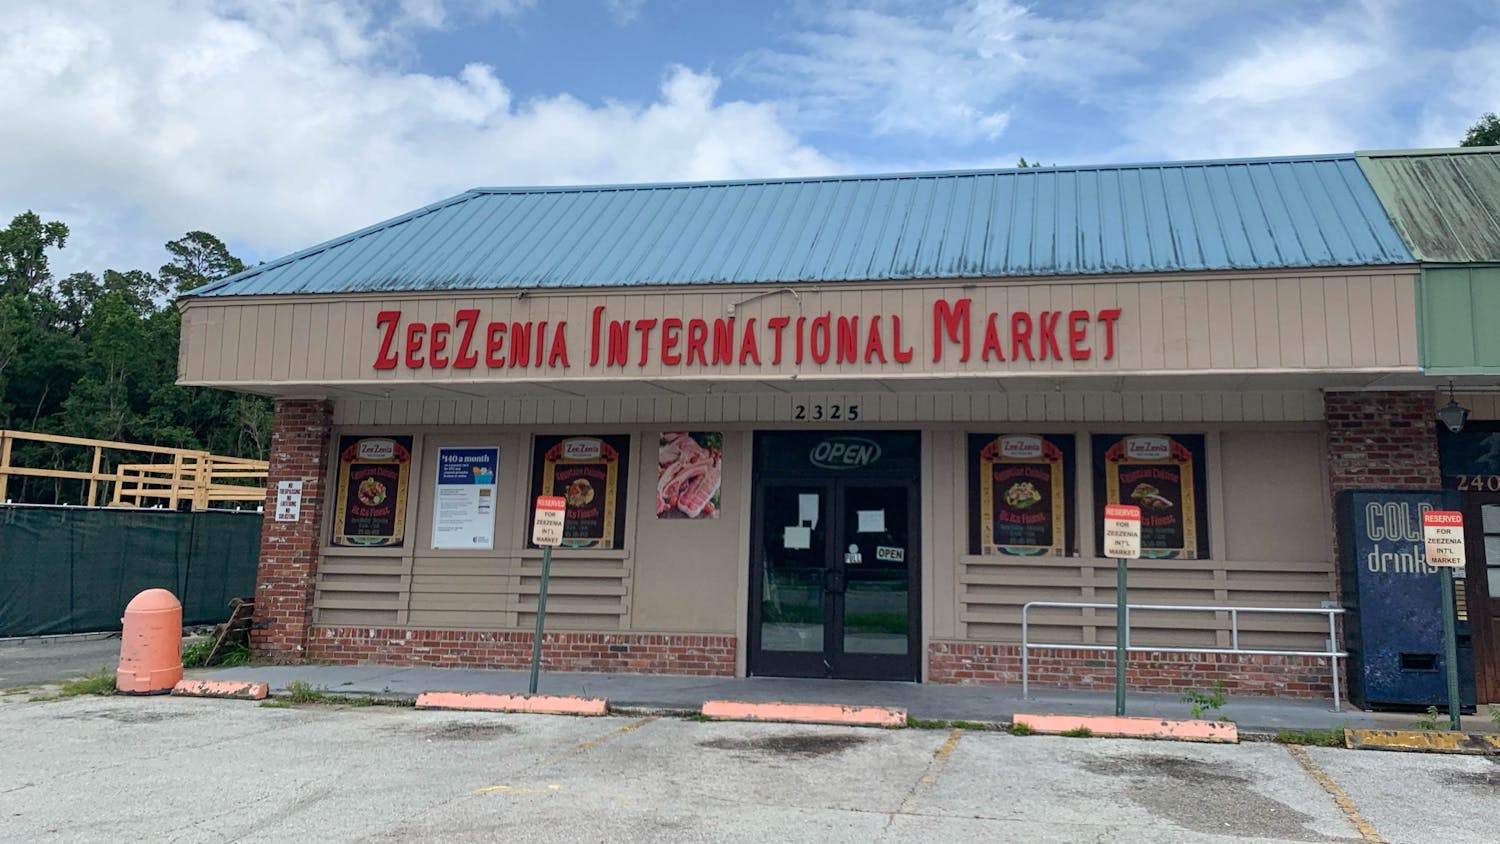 More than 200 supporters have donated to combat Zeezenia International Market&#x27;s climbing repair costs.